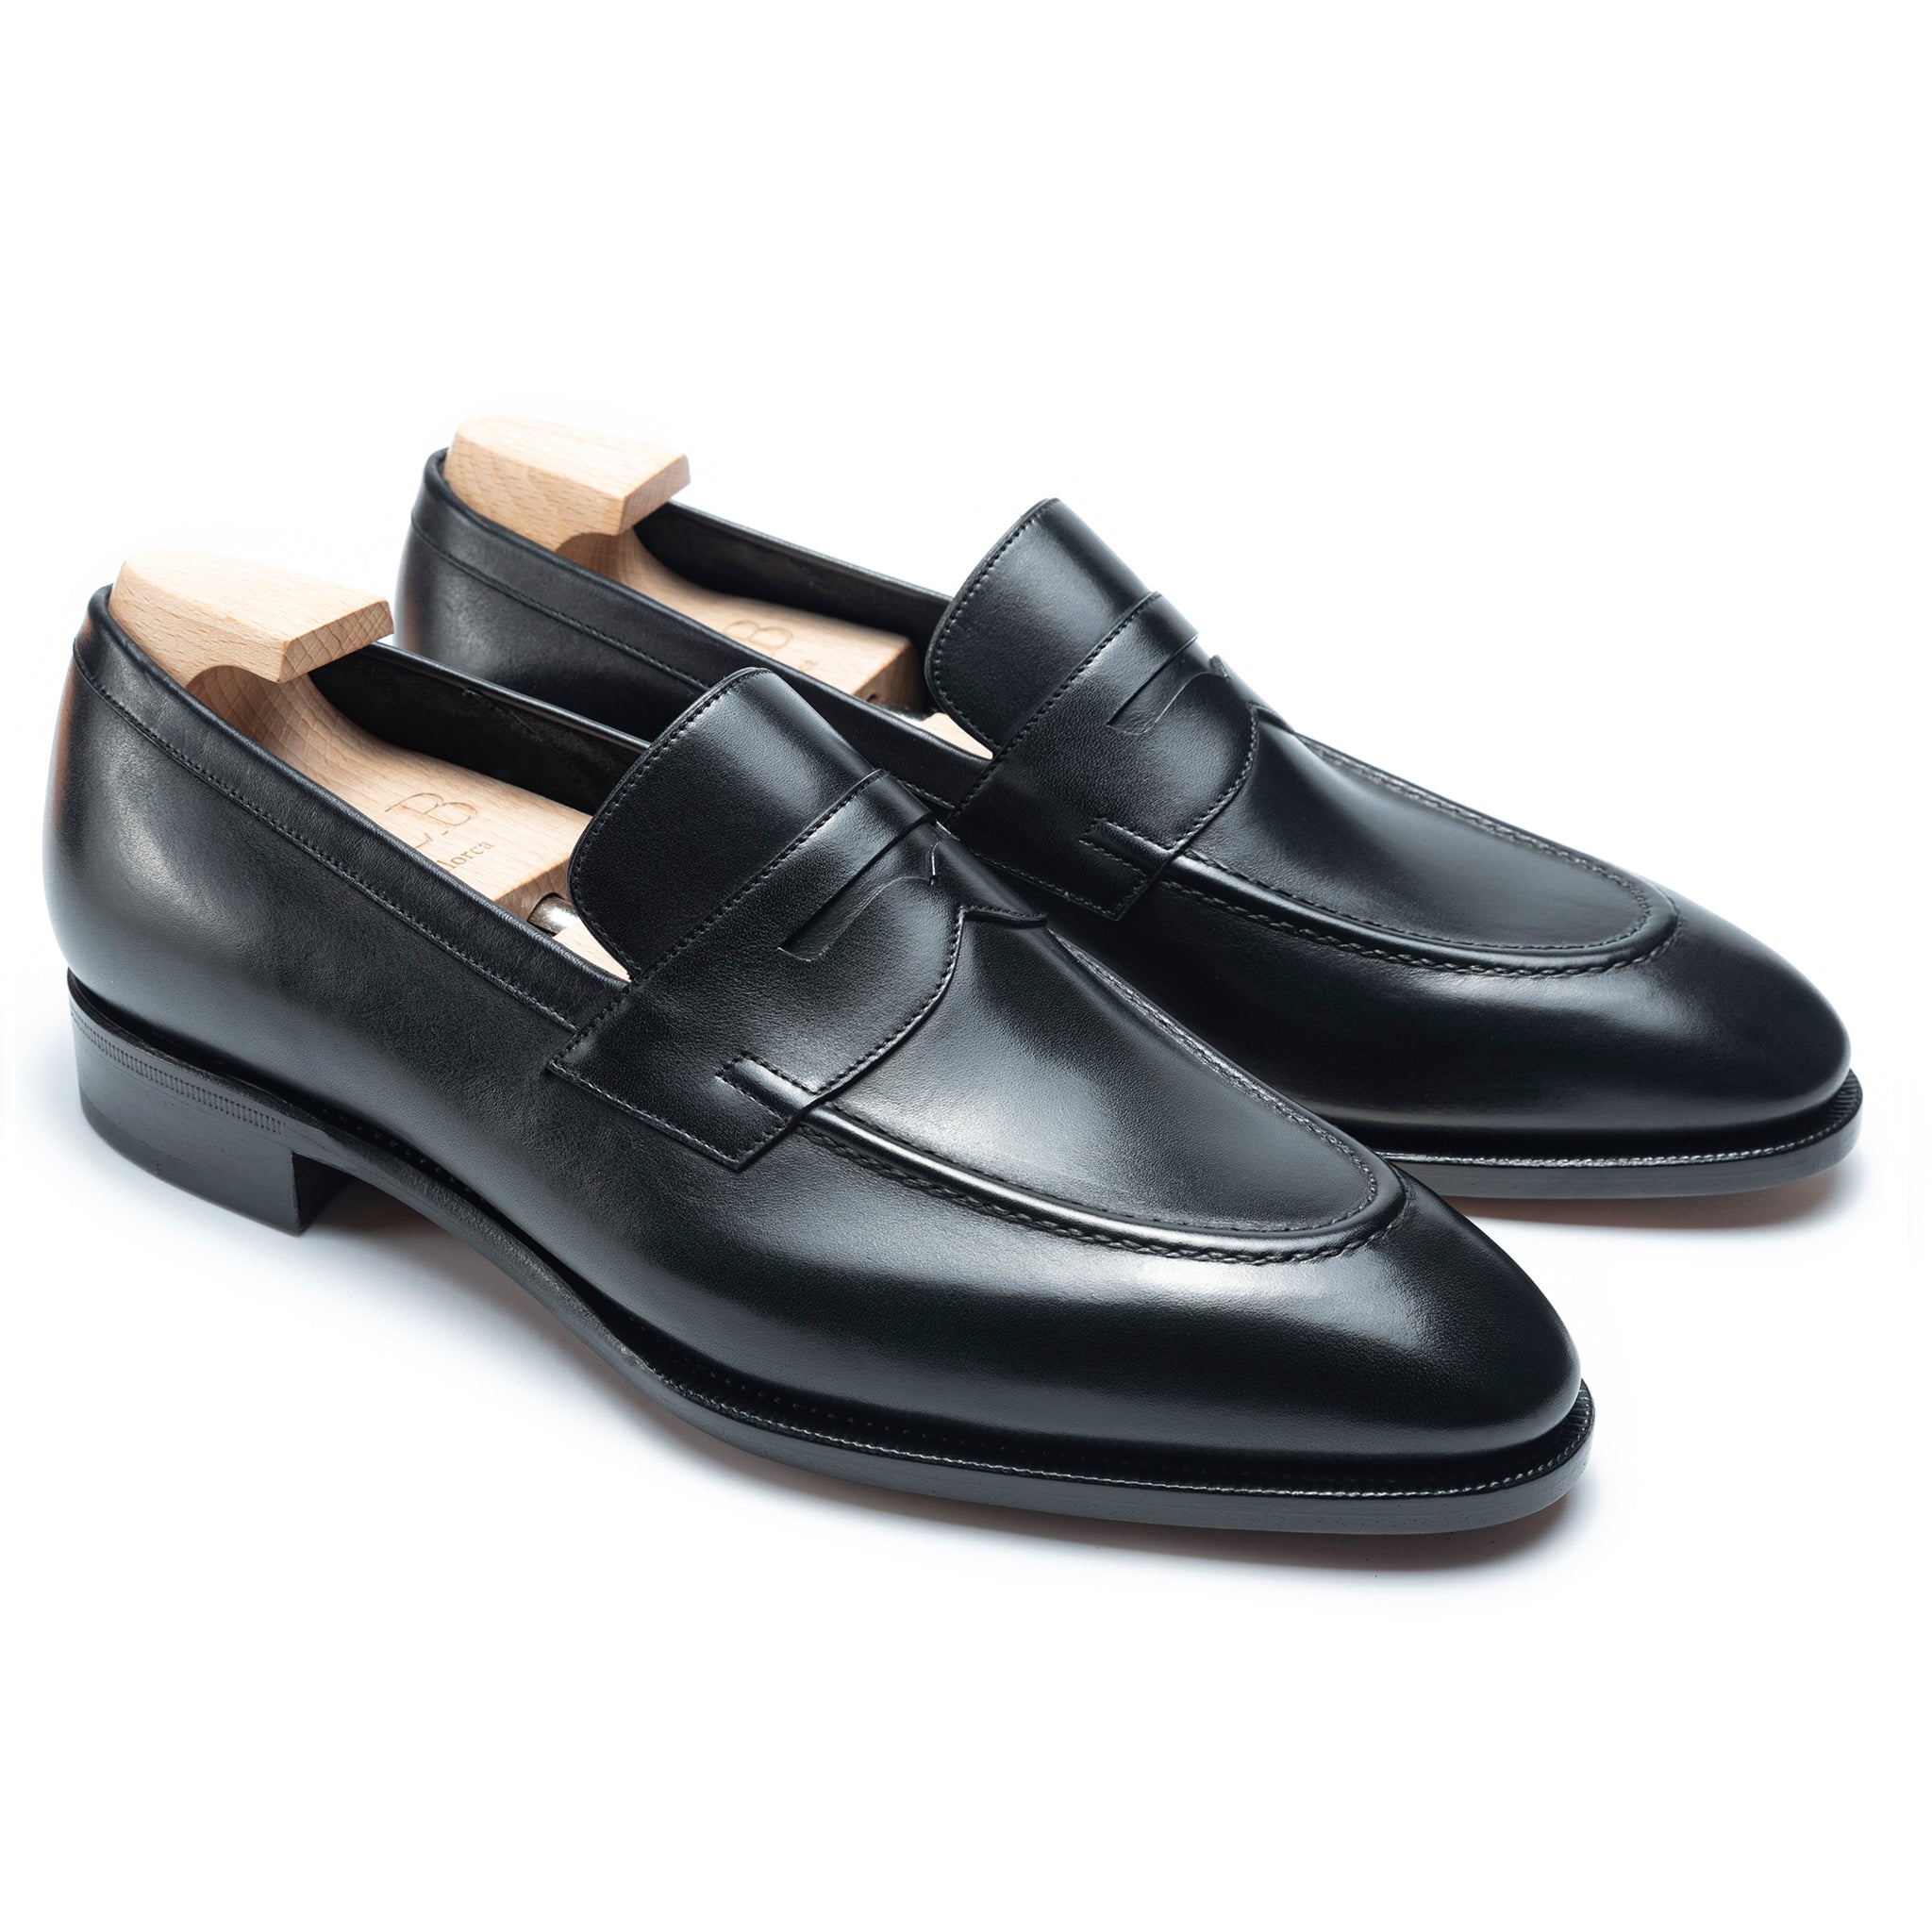 Men's Leather loafers | Men's leather shoes | Goya  - TLB Mallorca